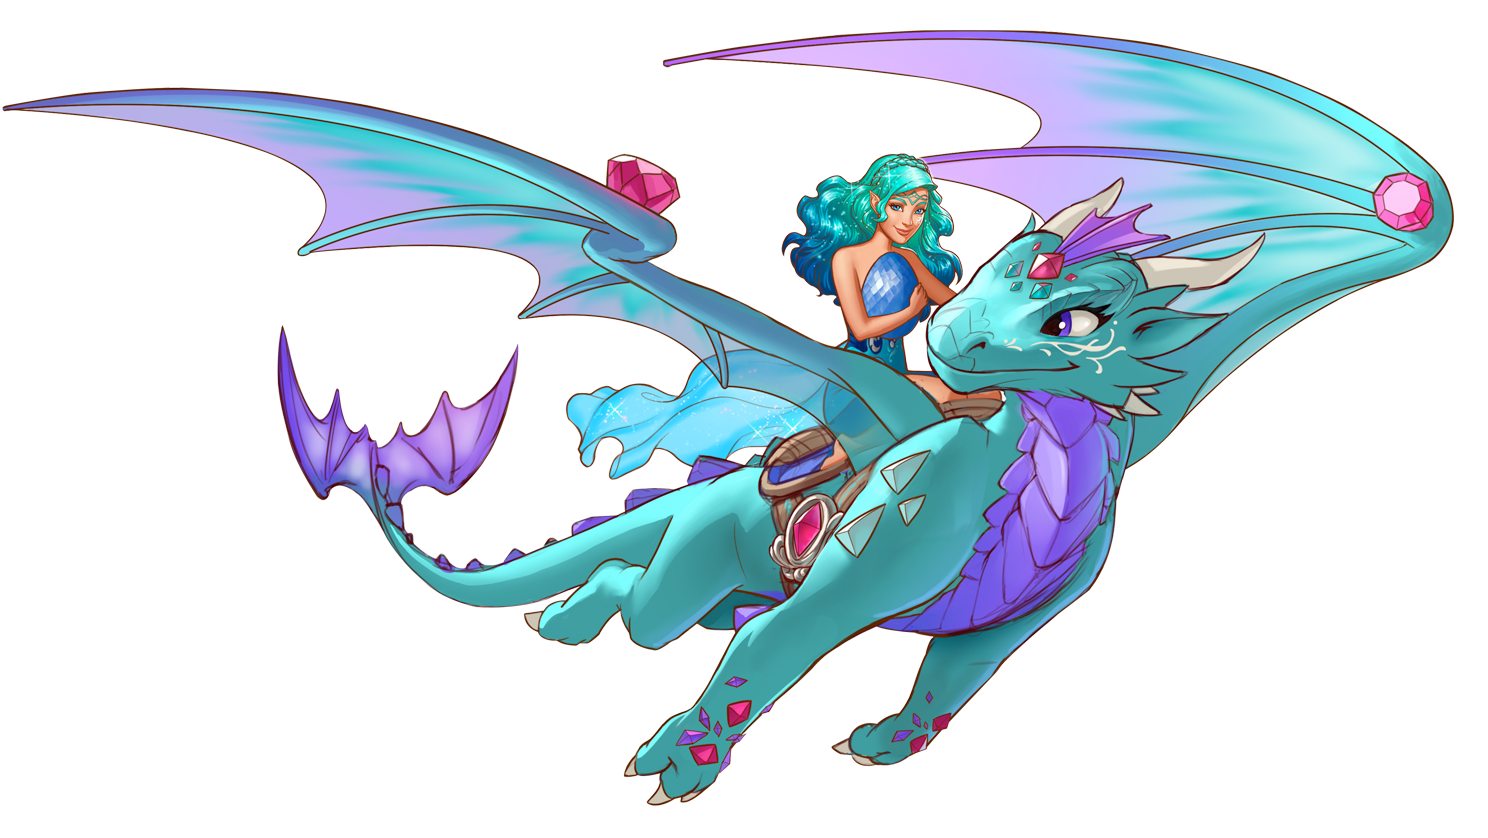 1000+ images about Lego Elves on Pinterest.